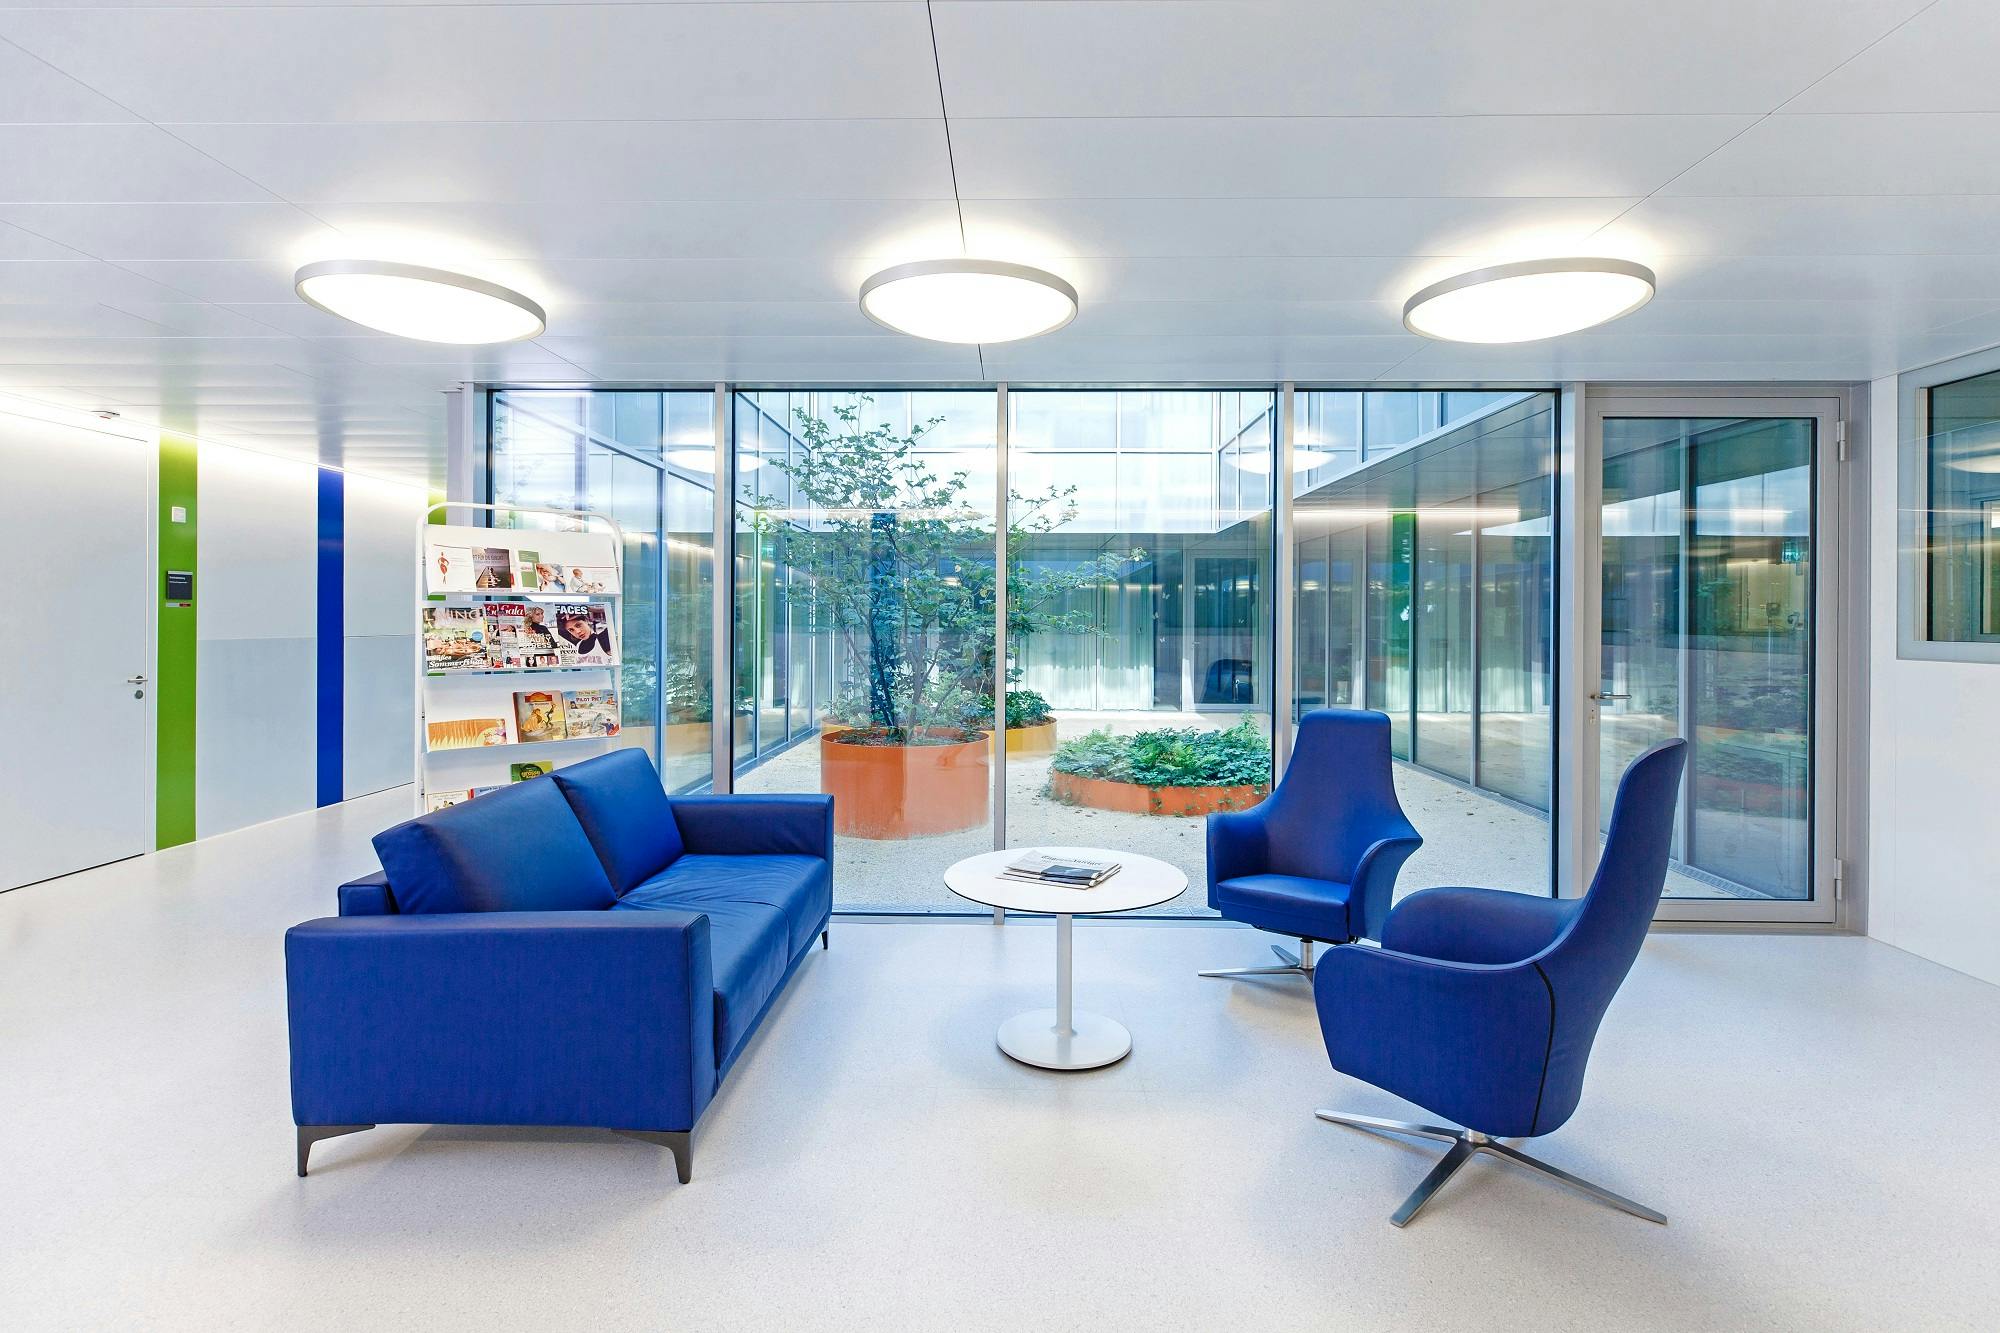 Modern waiting area with blue sofas, magazine rack and view of an inner courtyard.